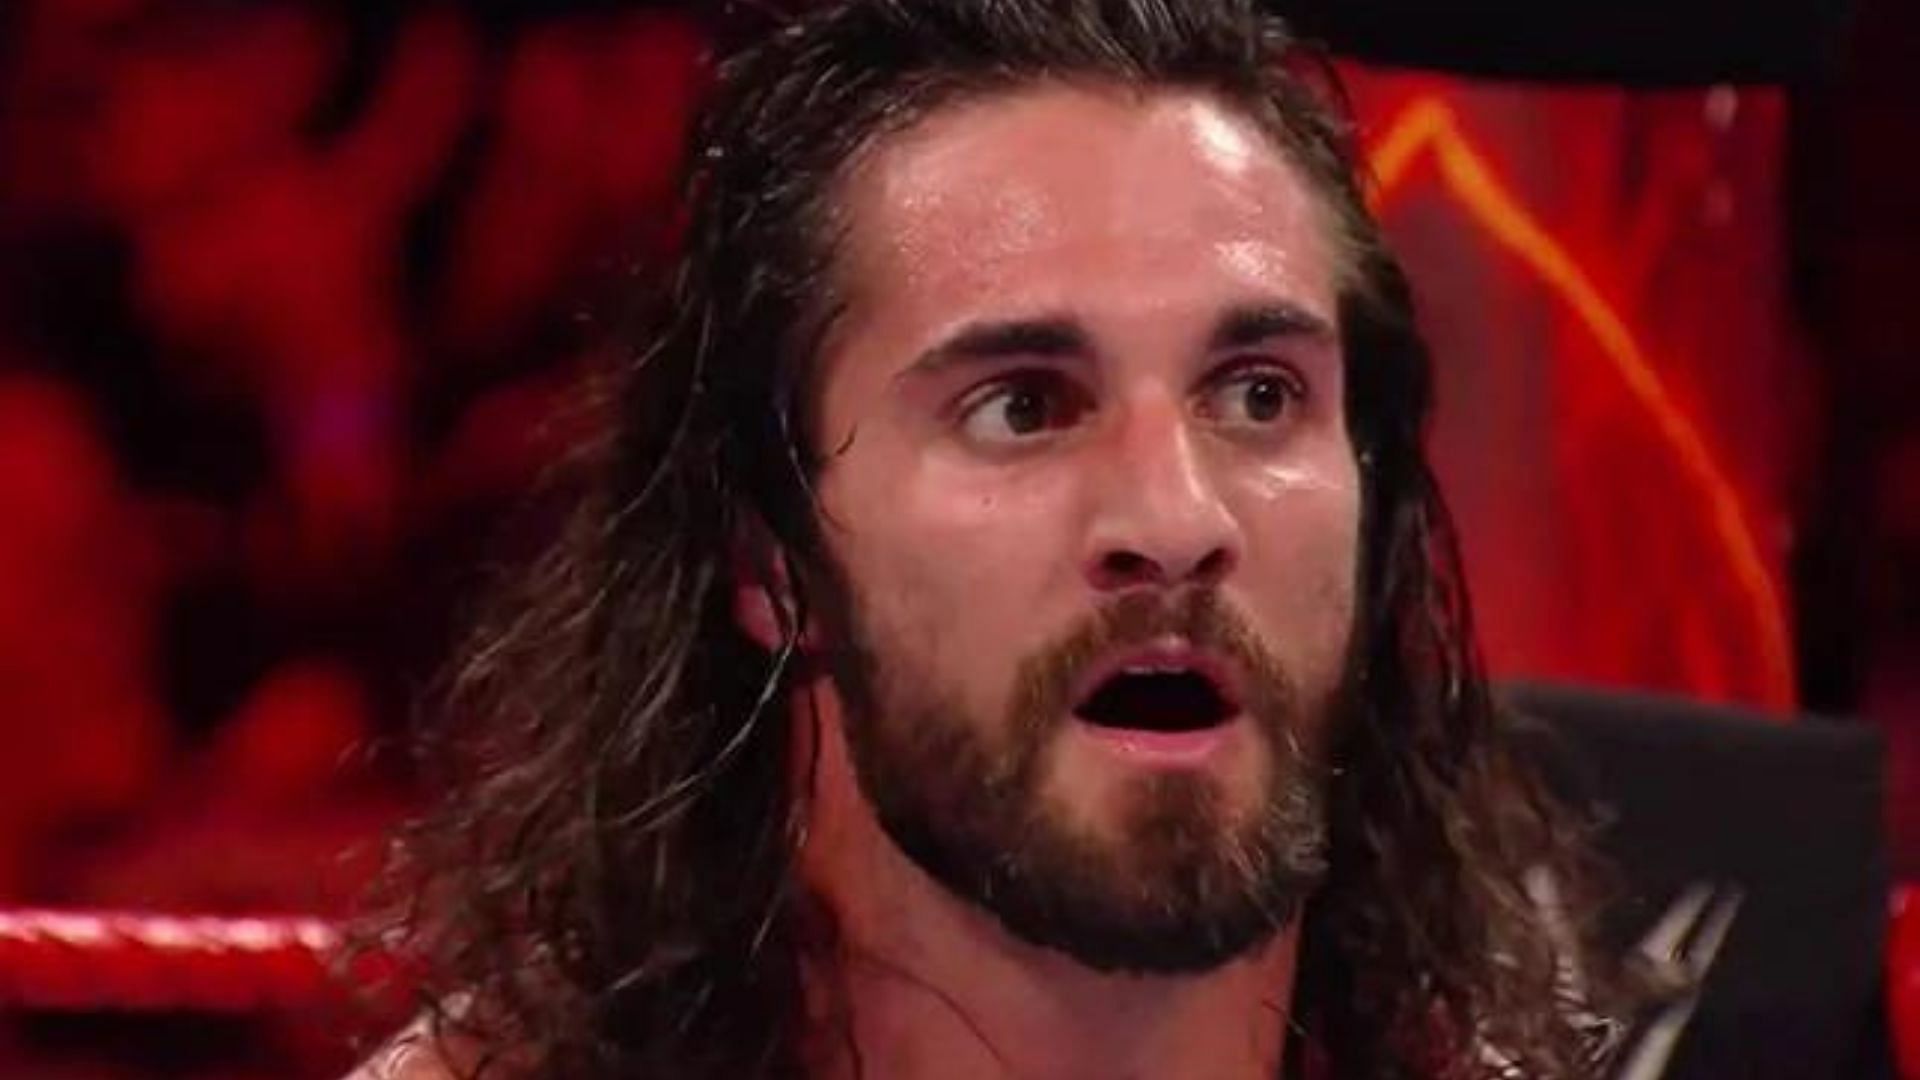 [Photo] Seth Rollins teases an iconic change in his current look